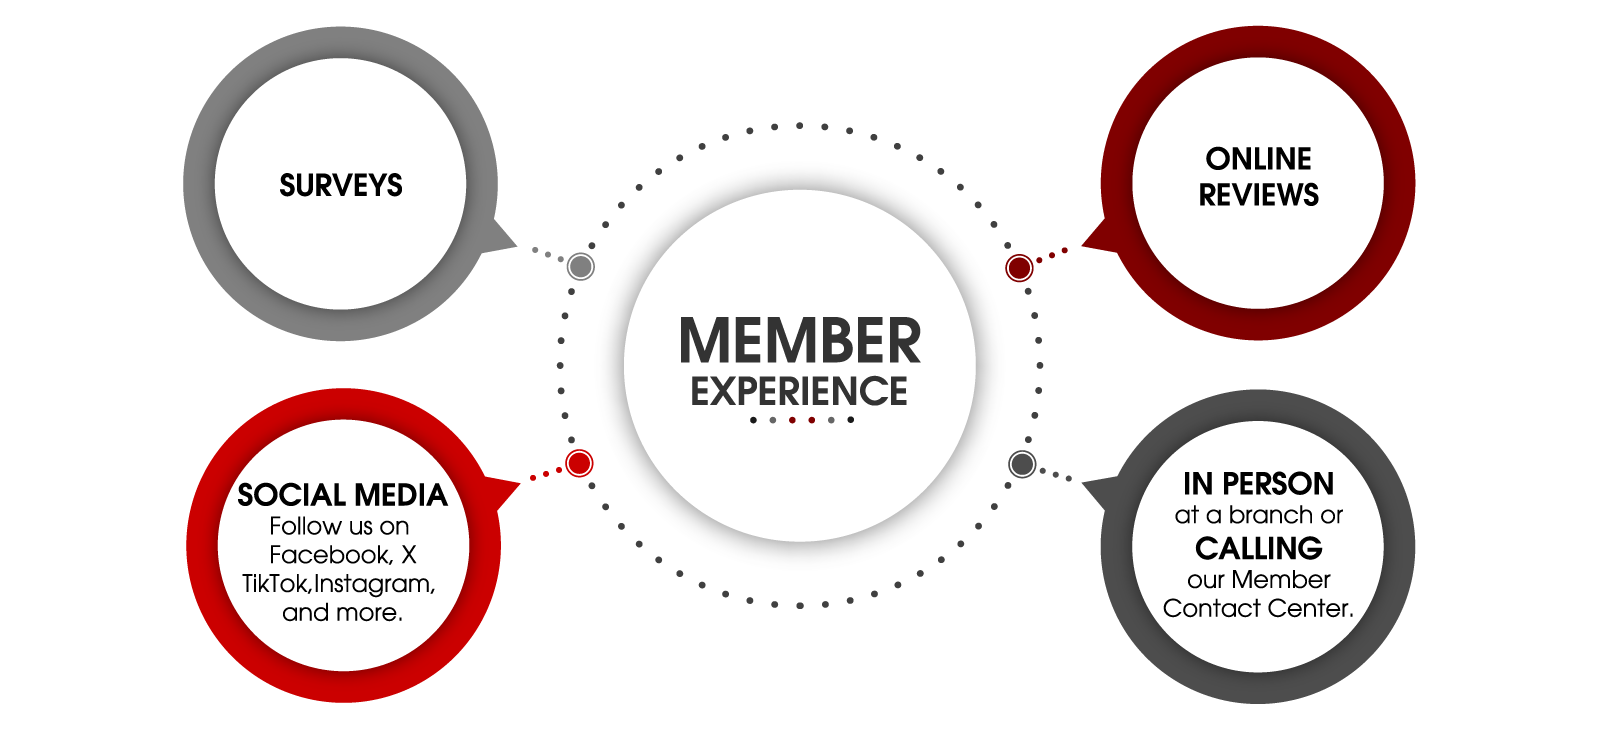 Member Experience Infographic